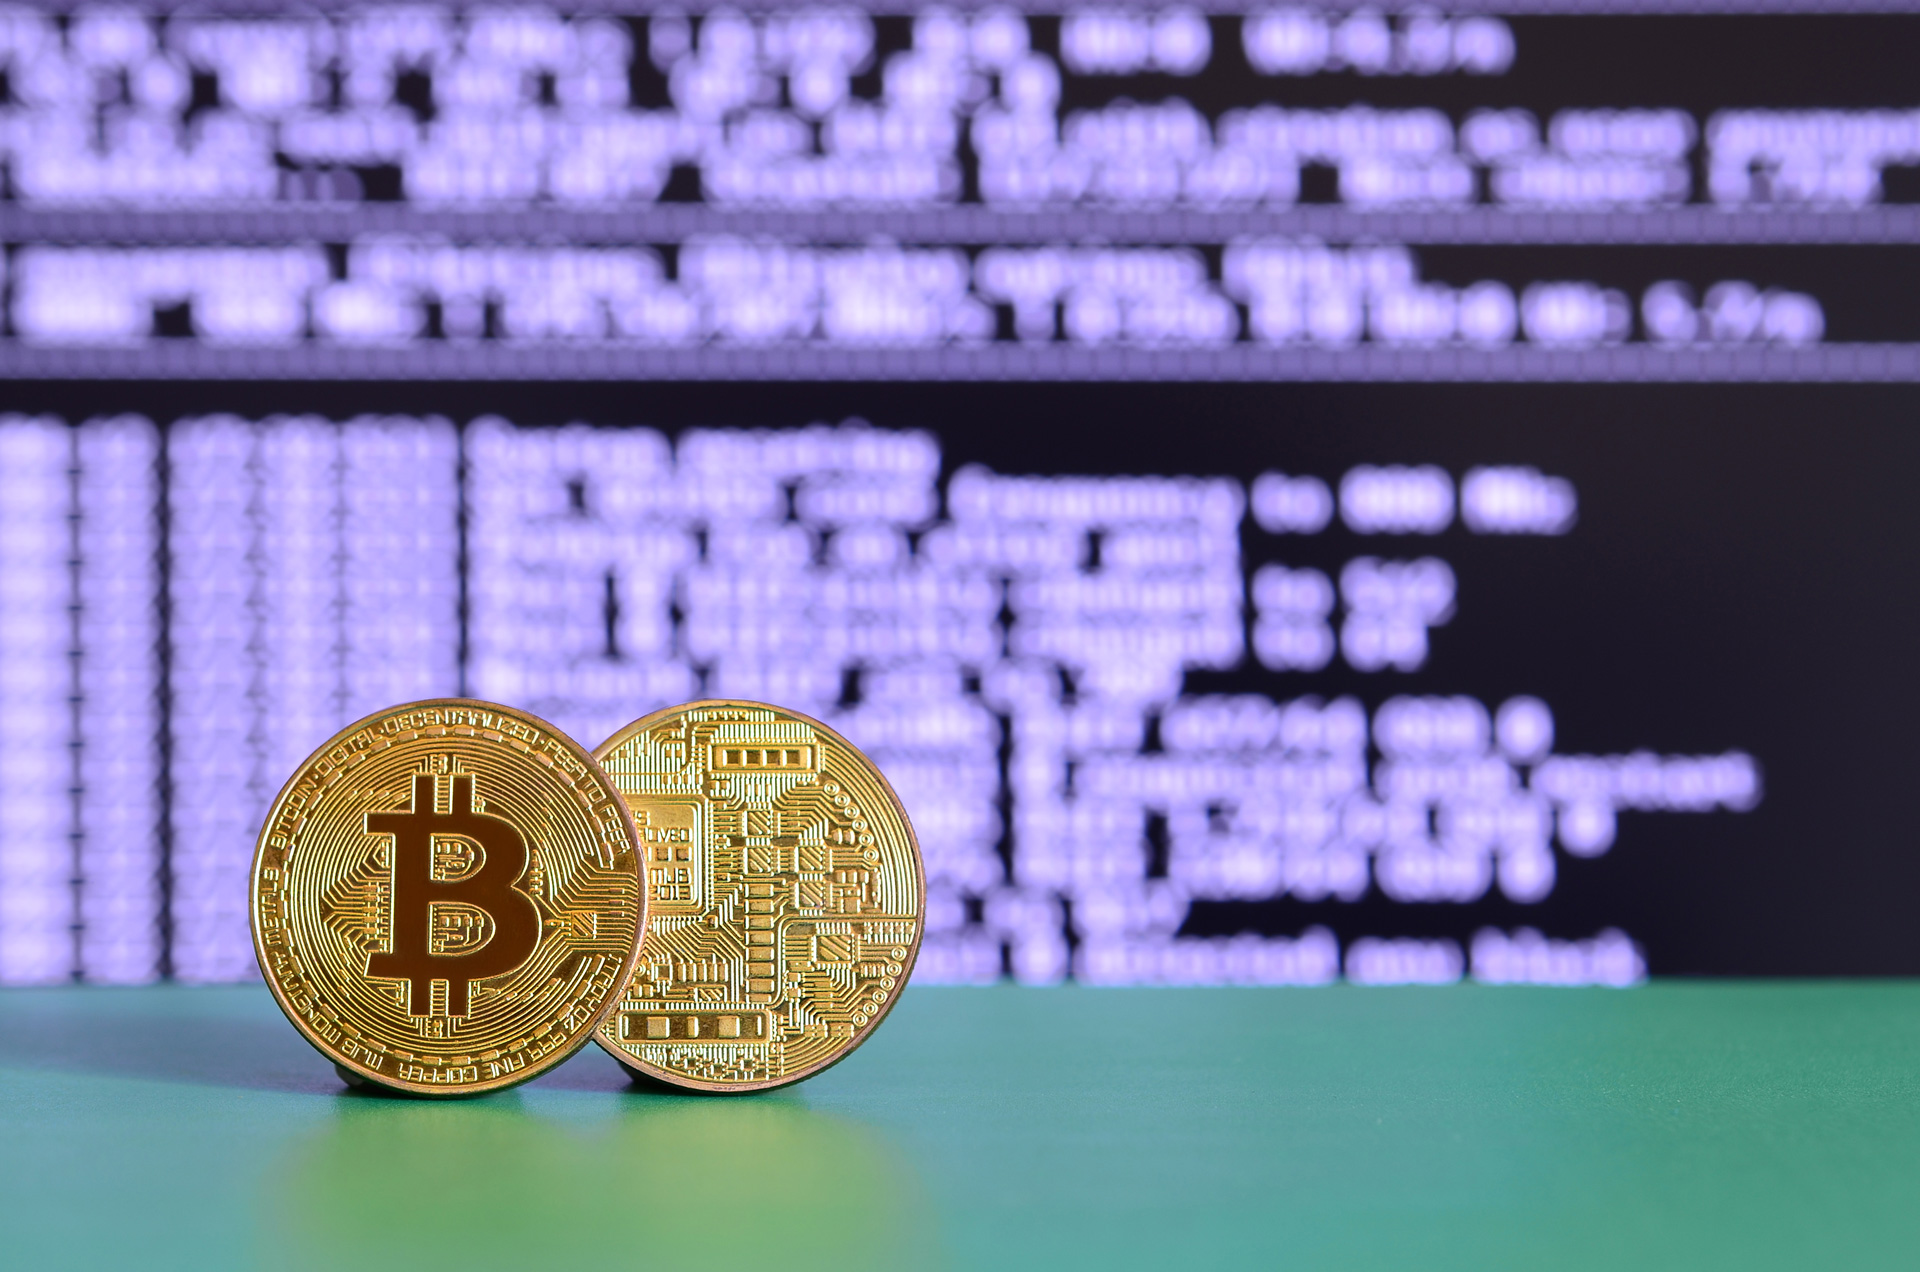 Two gold bitcoins lie on the green surface on the background of the display, which shows the process of mining the crypto currency